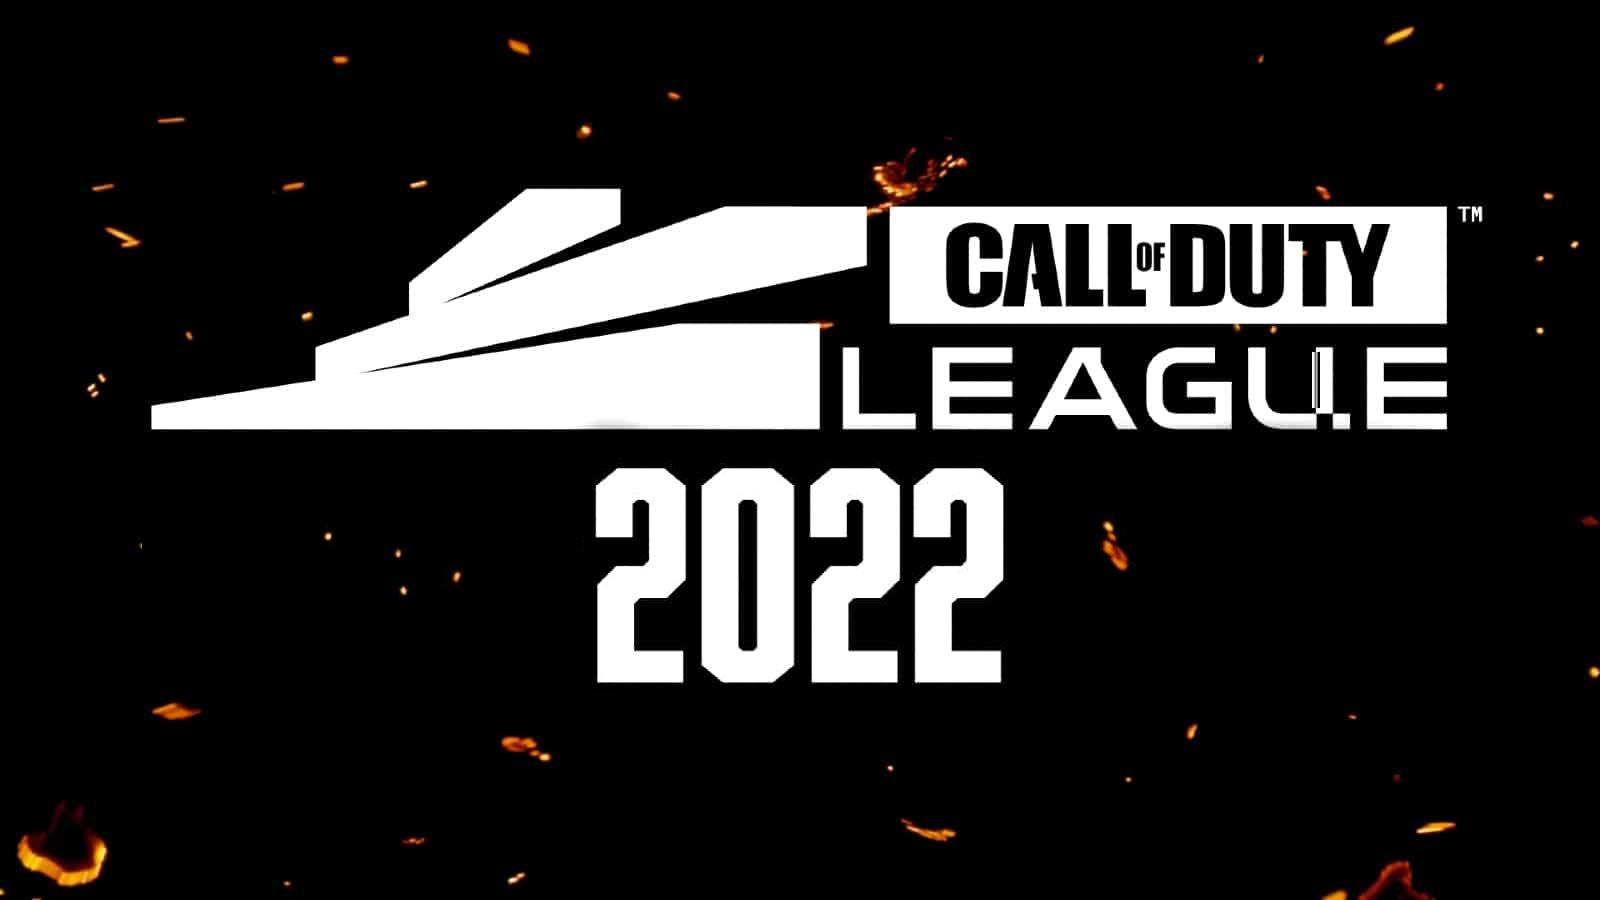 Call of Duty League 2022 logo with fiery background